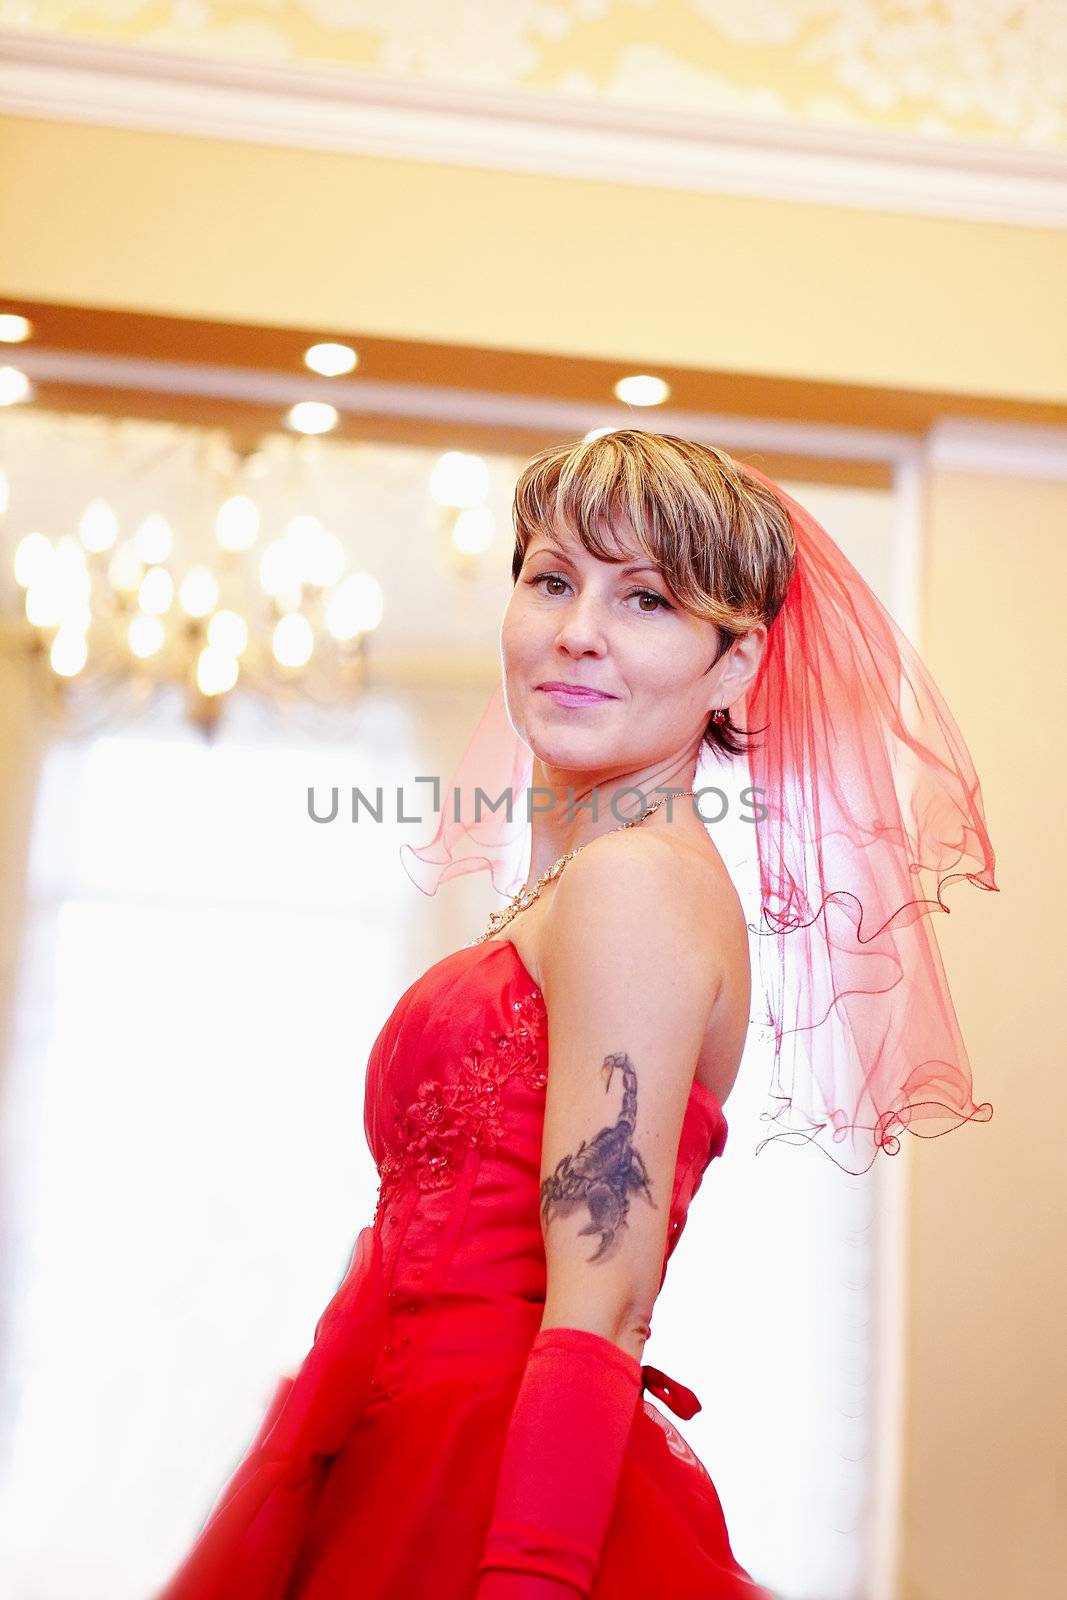 The beautiful bride in a red dress in the room